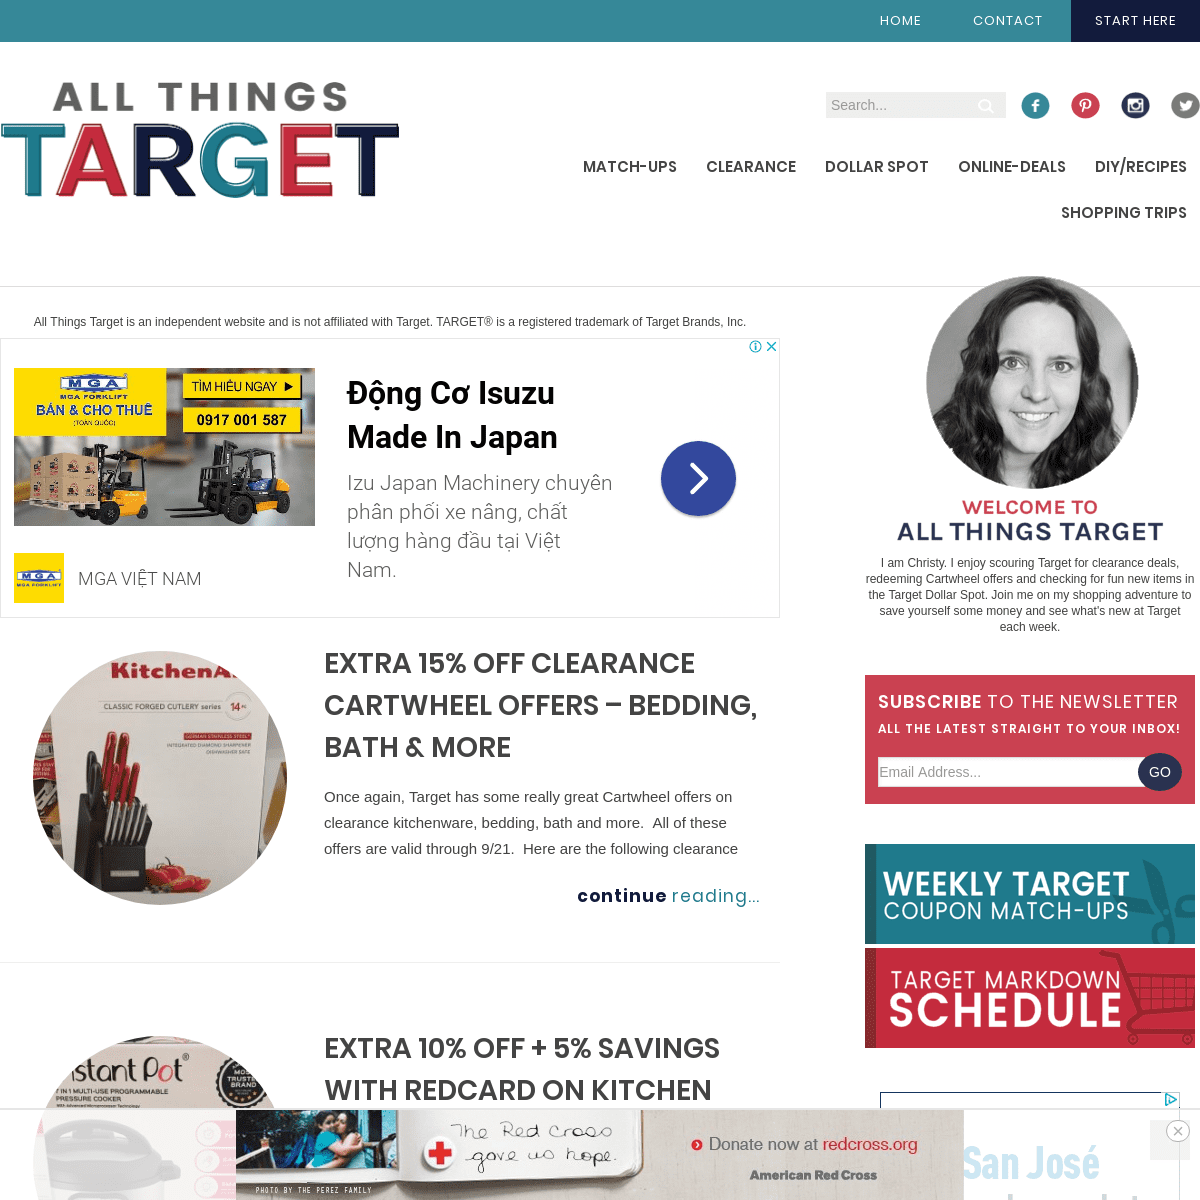 All Things Target | Save Money with Target Coupons, Clearance Deals and more